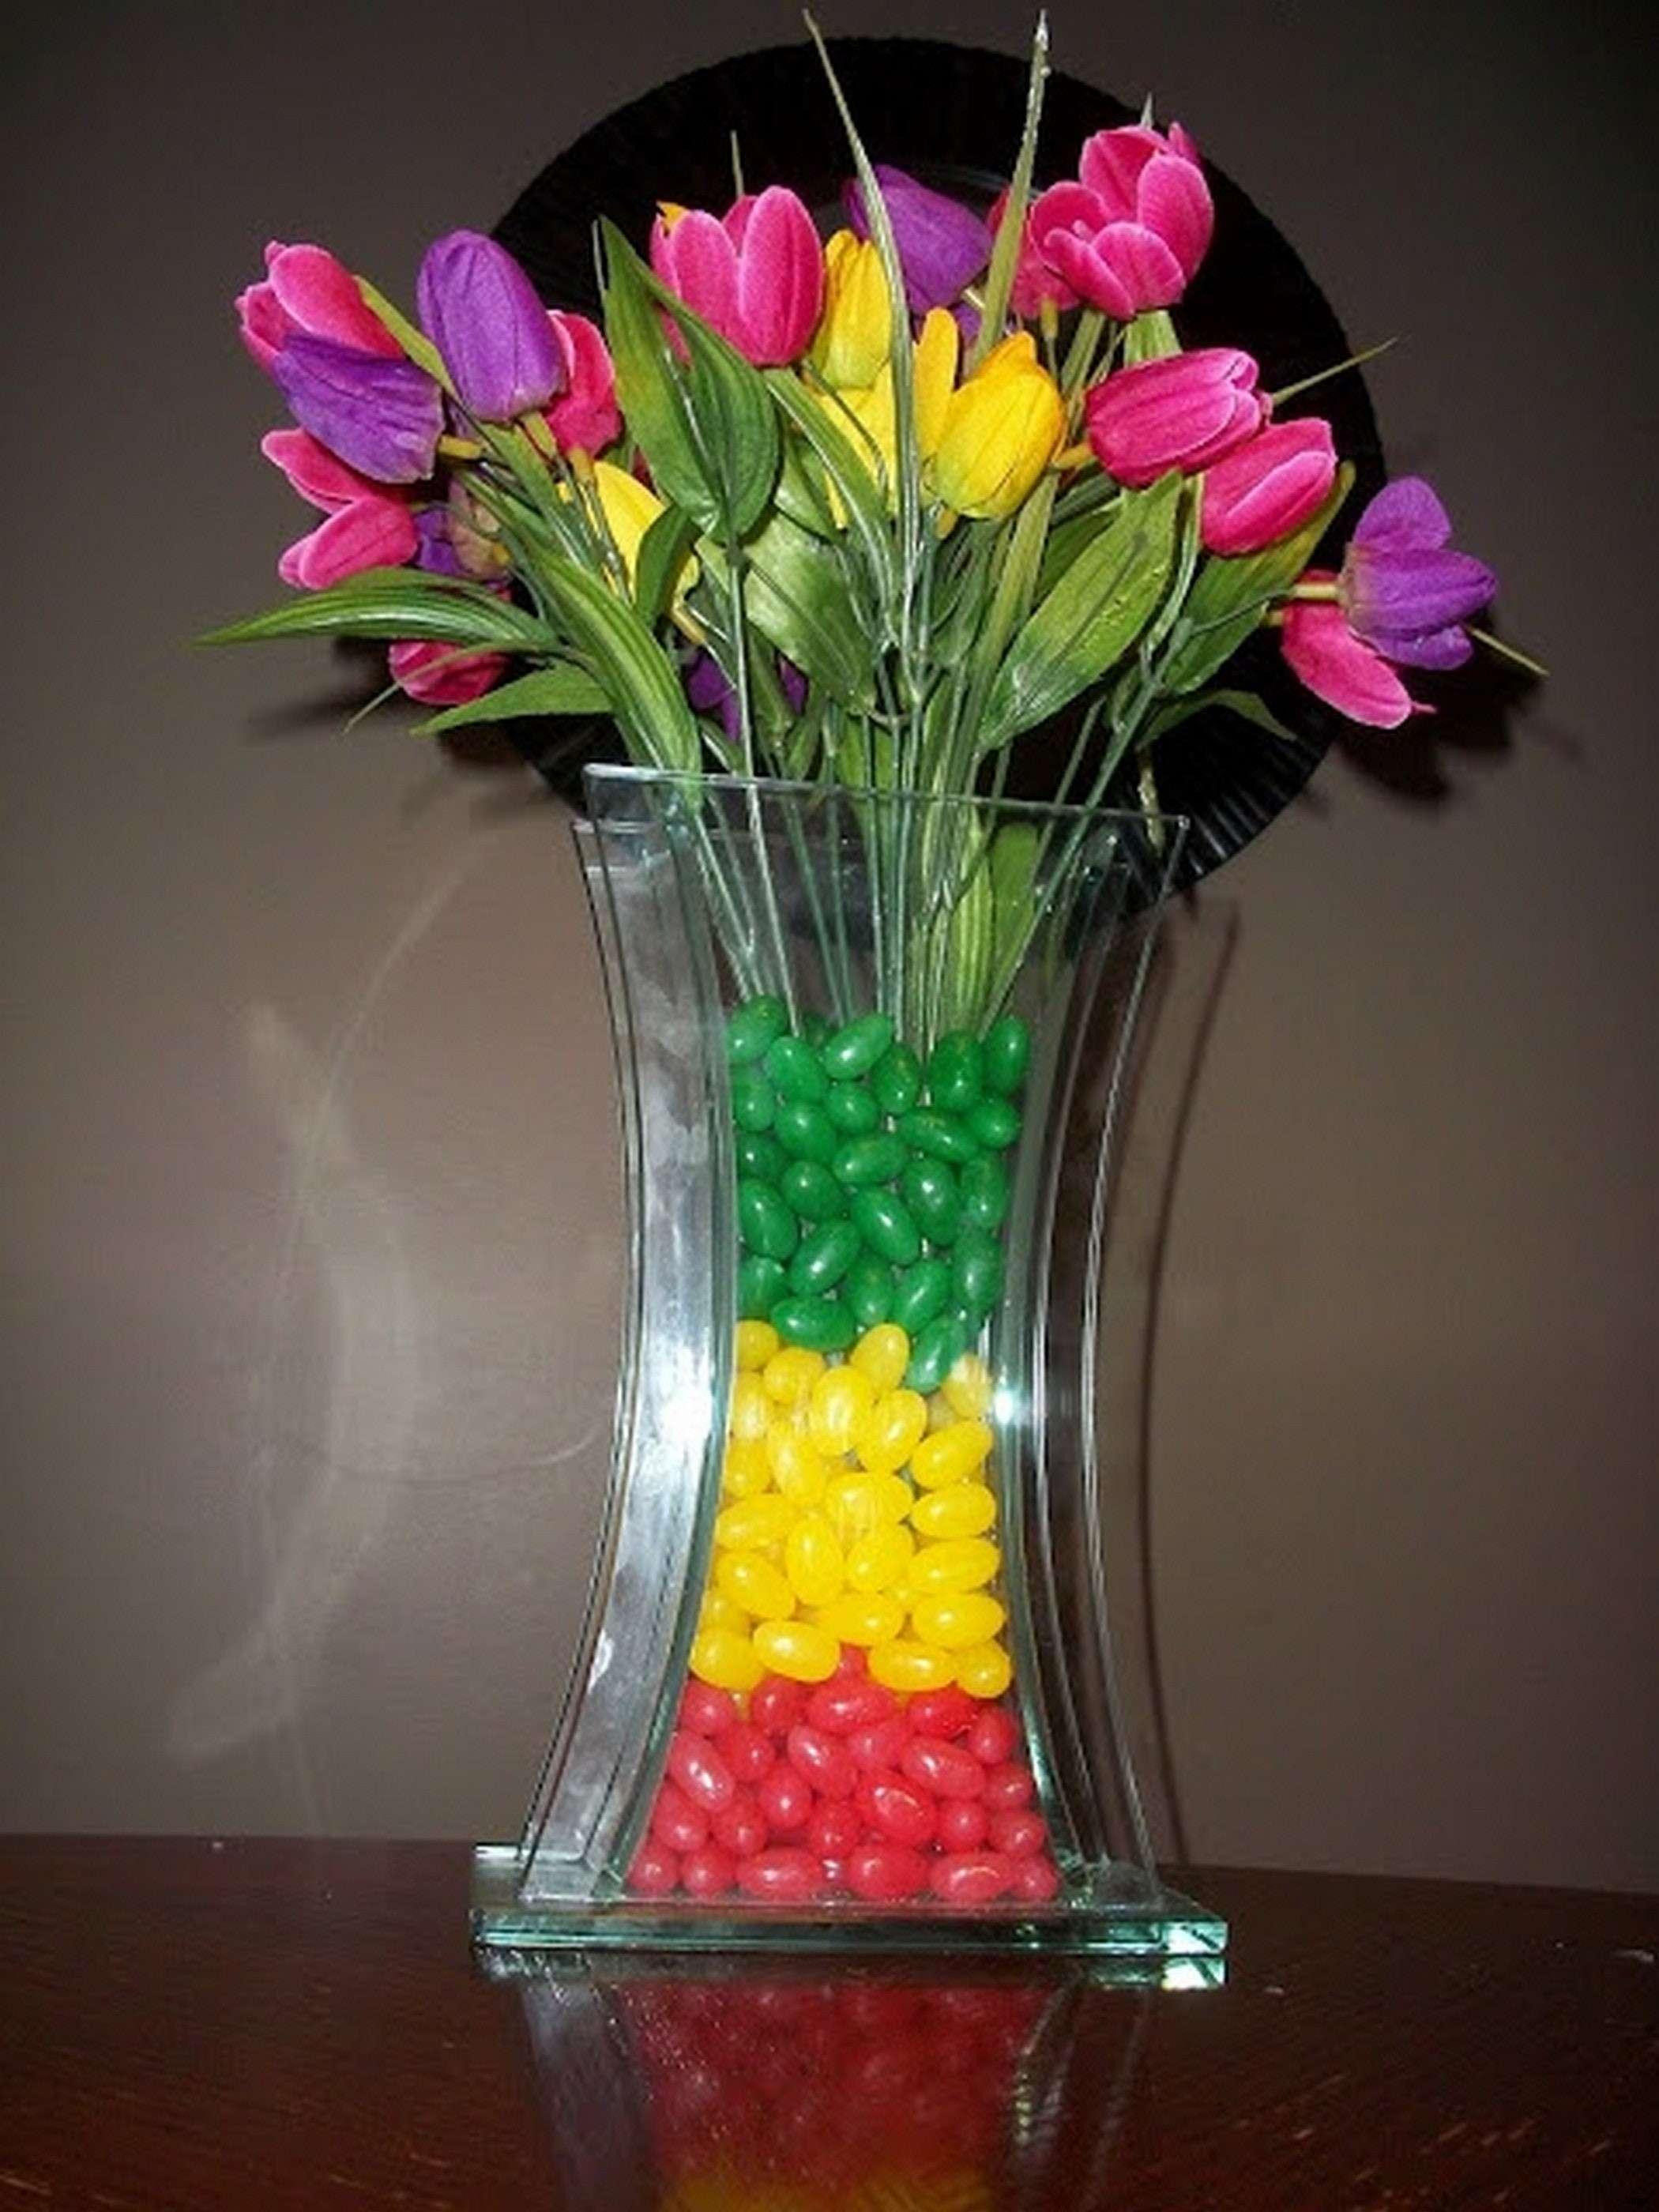 diy wall mounted vase of diy craft ideas best of 15 cheap and easy diy vase filler ideas 3h within diy craft ideas best of 15 cheap and easy diy vase filler ideas 3h vases flower